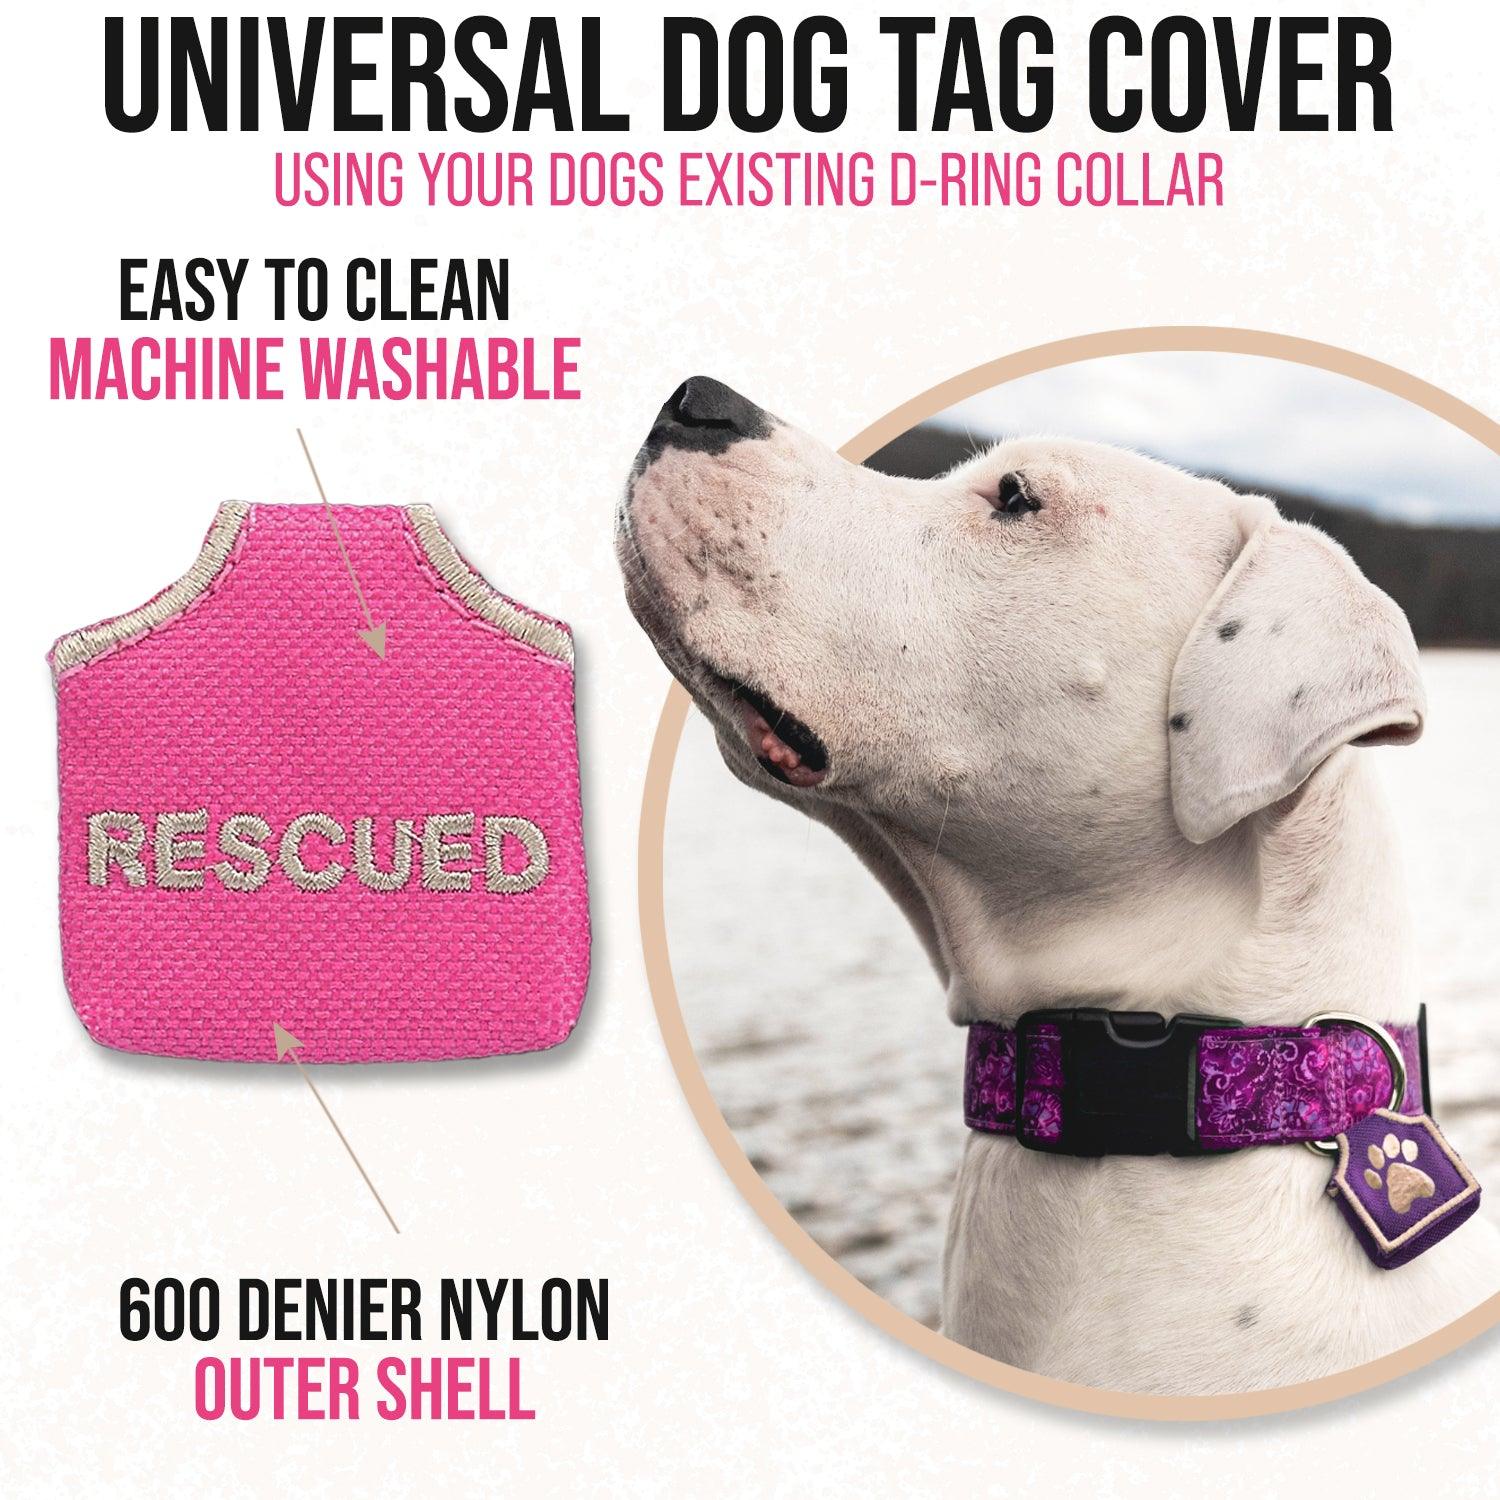 Pink dog tag silencer and while dog with purple pet tag cover